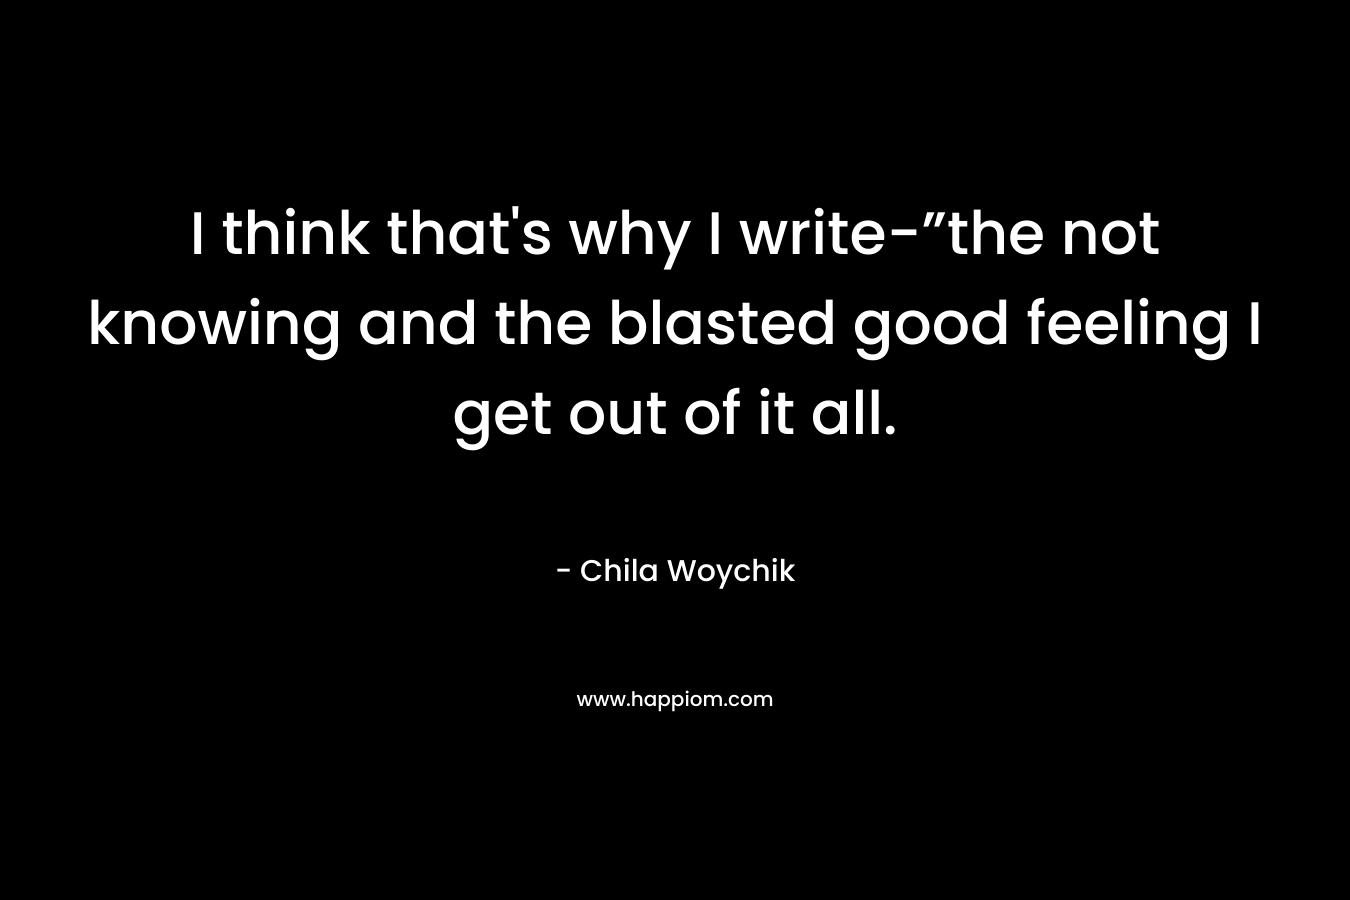 I think that's why I write-”the not knowing and the blasted good feeling I get out of it all.